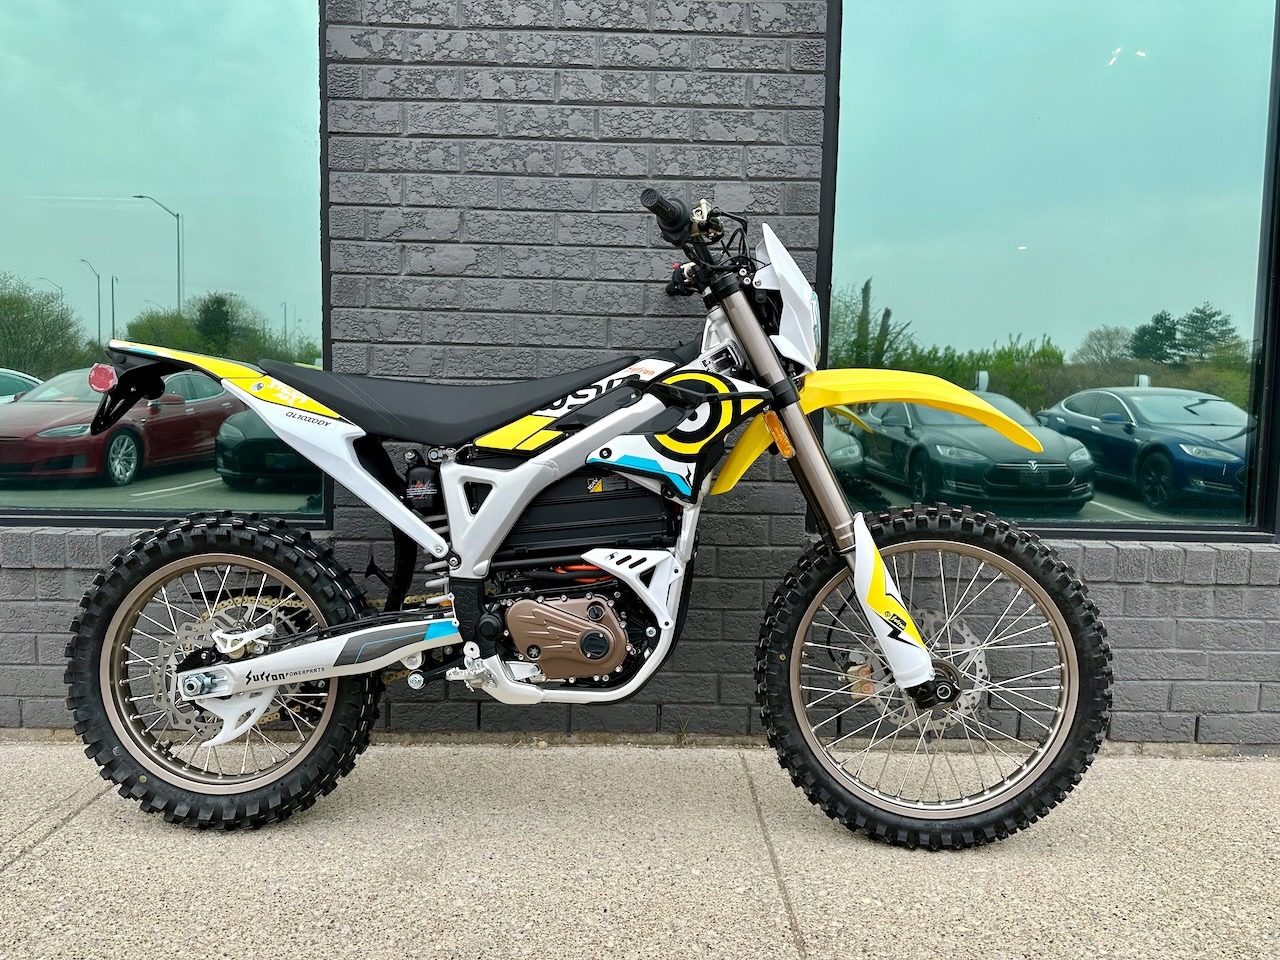 2023 SURRON Storm Bee all new, in stock and ready to ride!